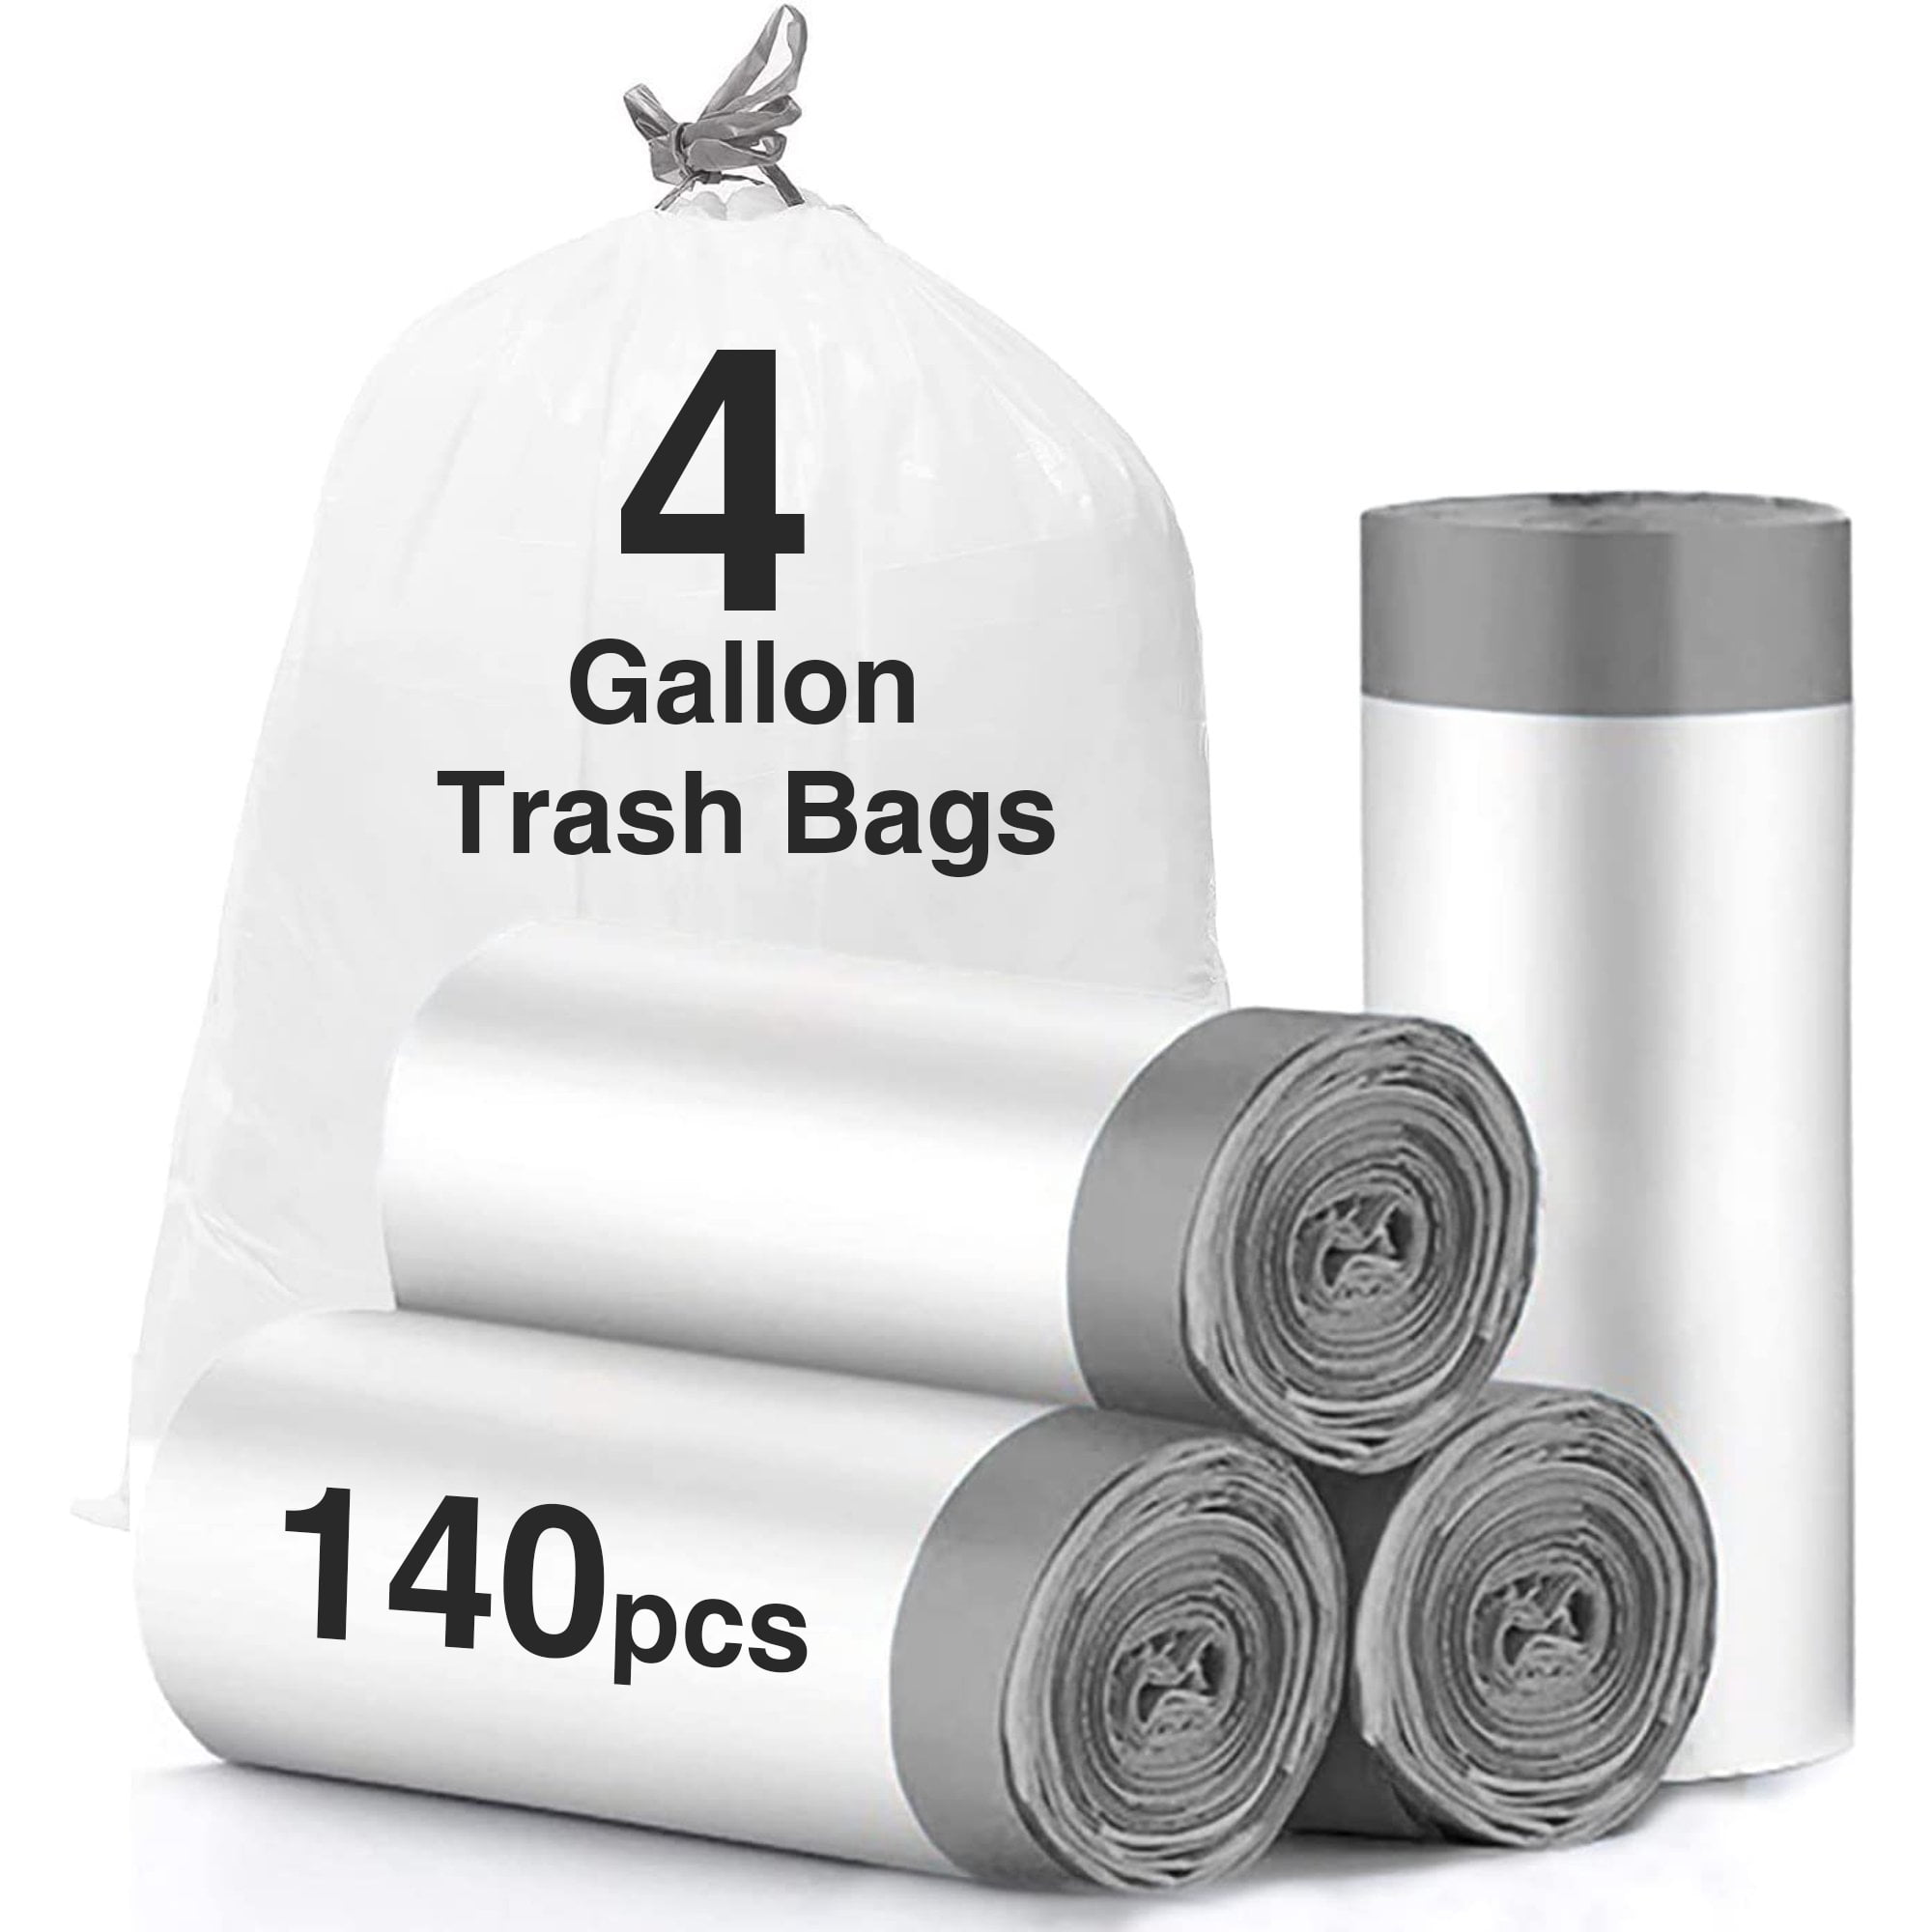 Buy Morcte 18 Gallon Trash Bags, Gray Garbage Bag, 100 counts Now! Only $